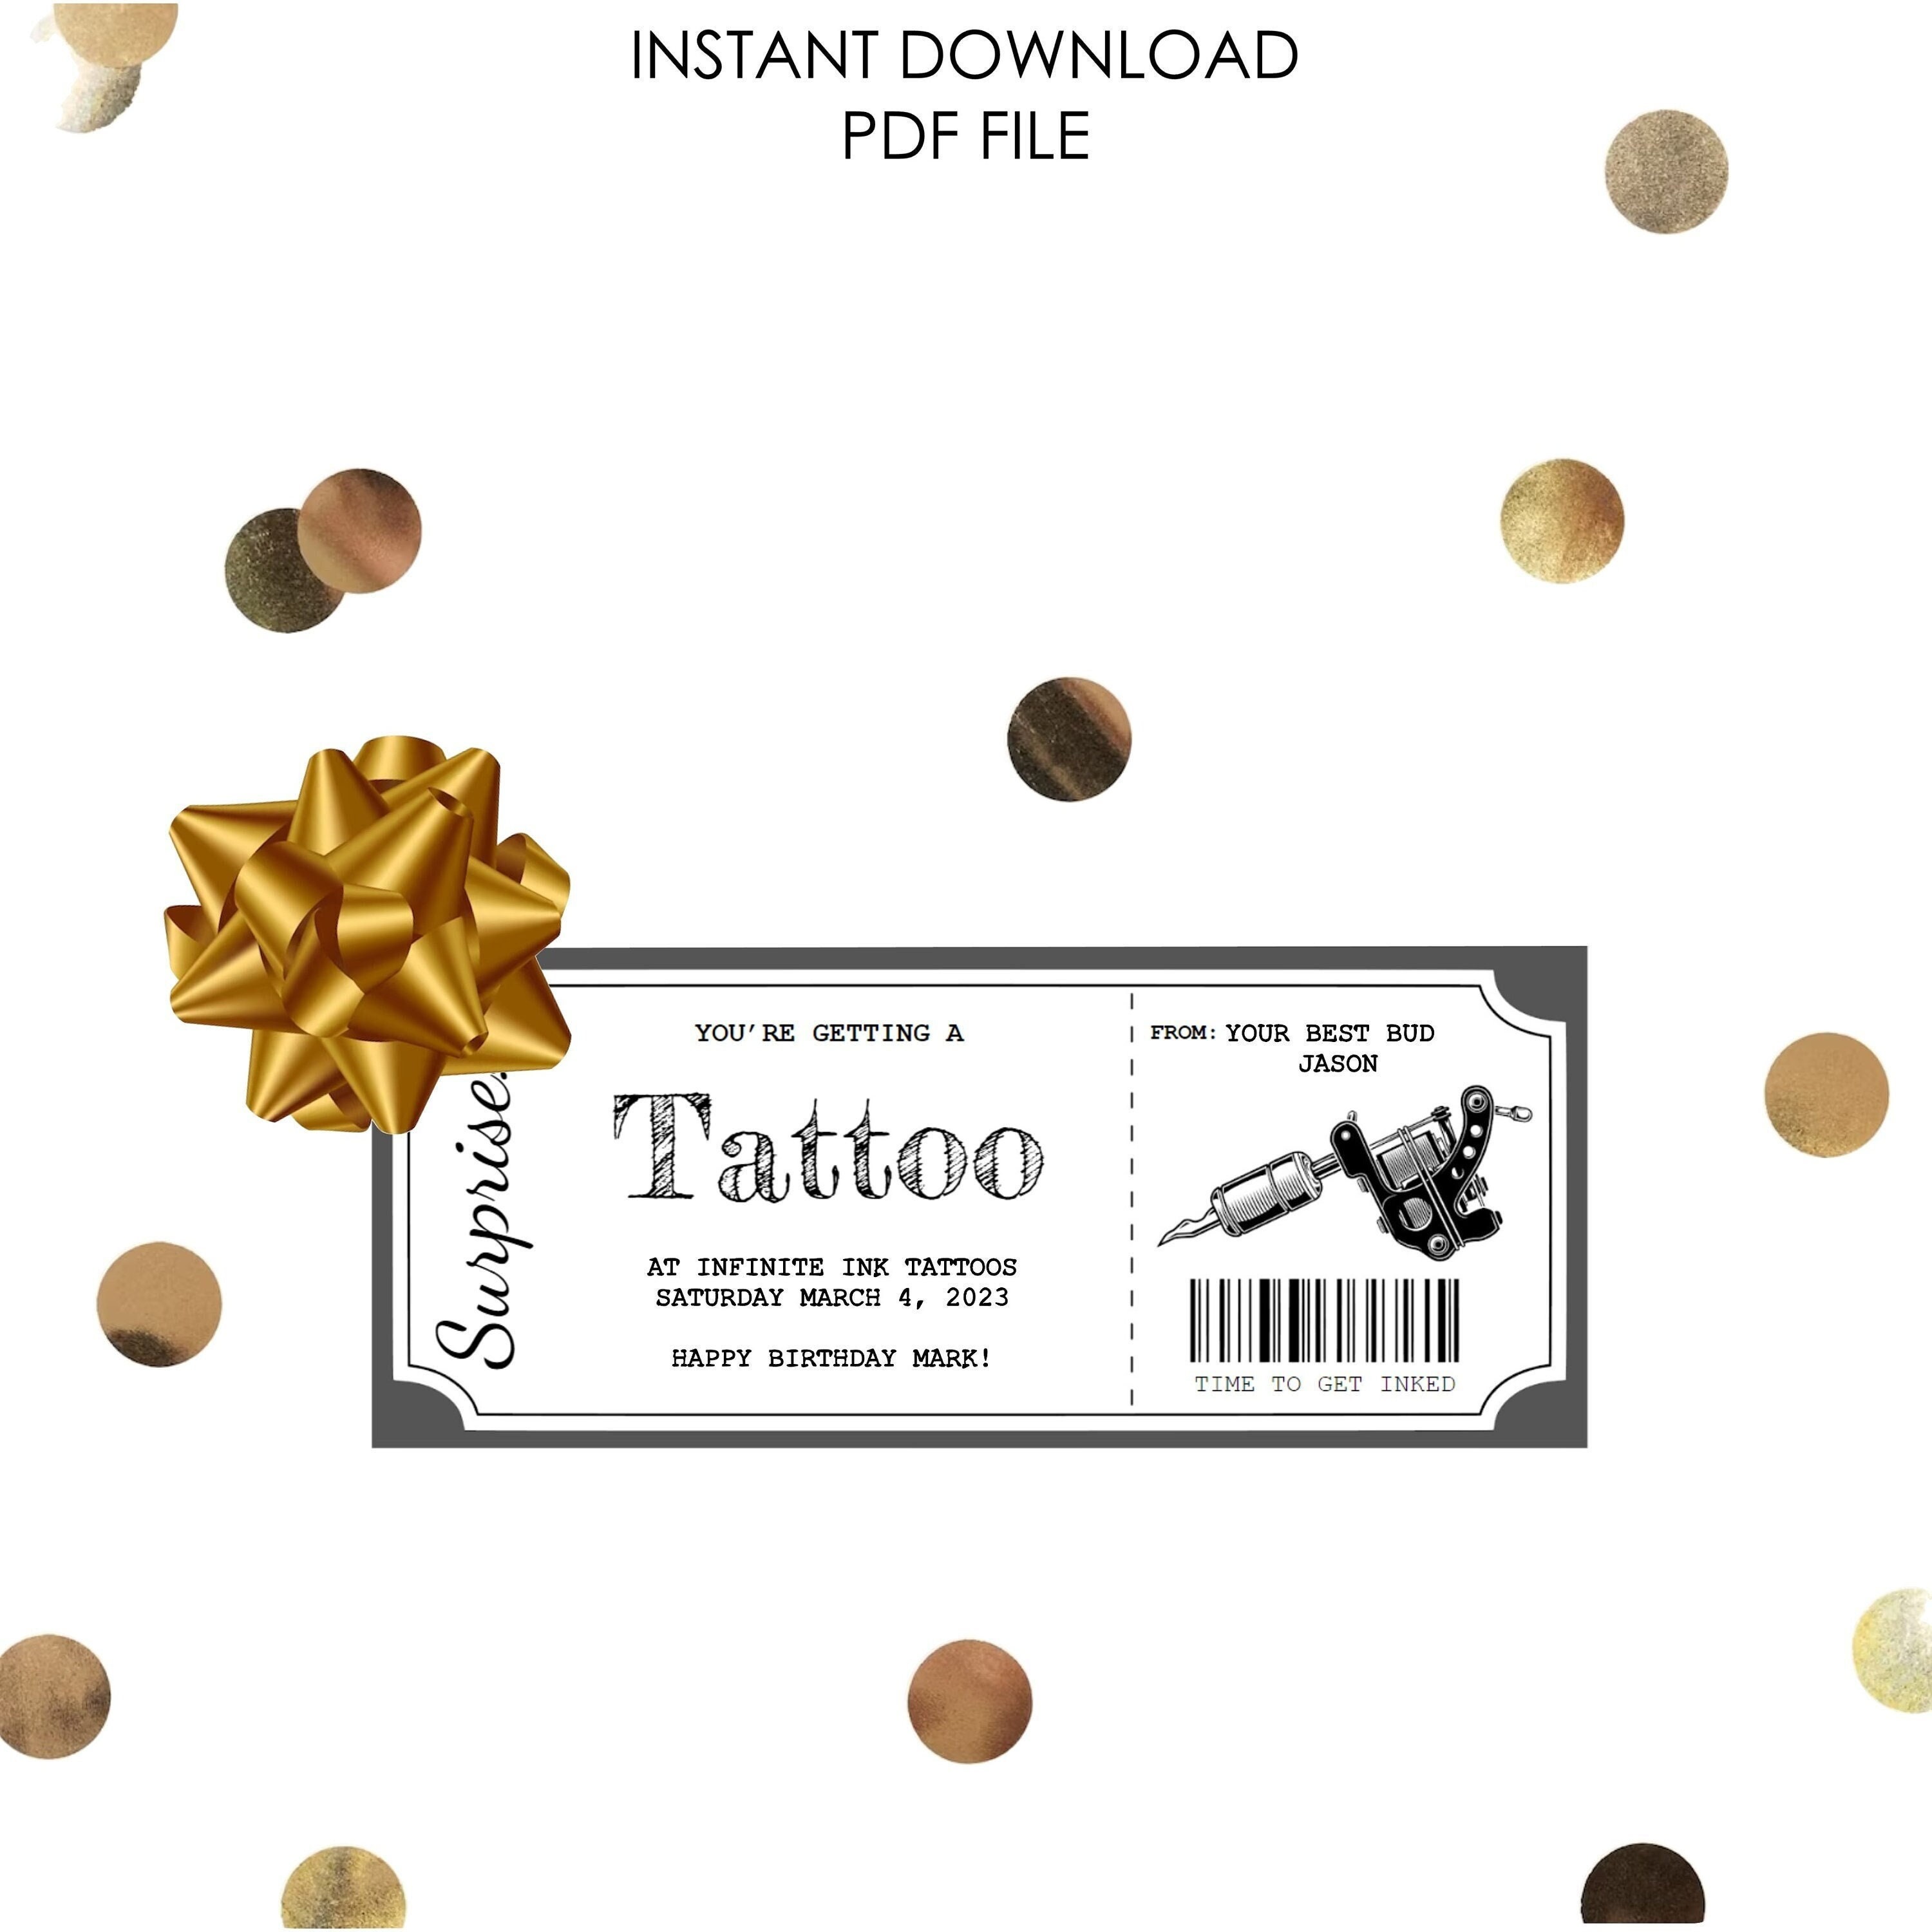 Top 5 Christmas Gifts for Tattoo Lovers – Stories and Ink